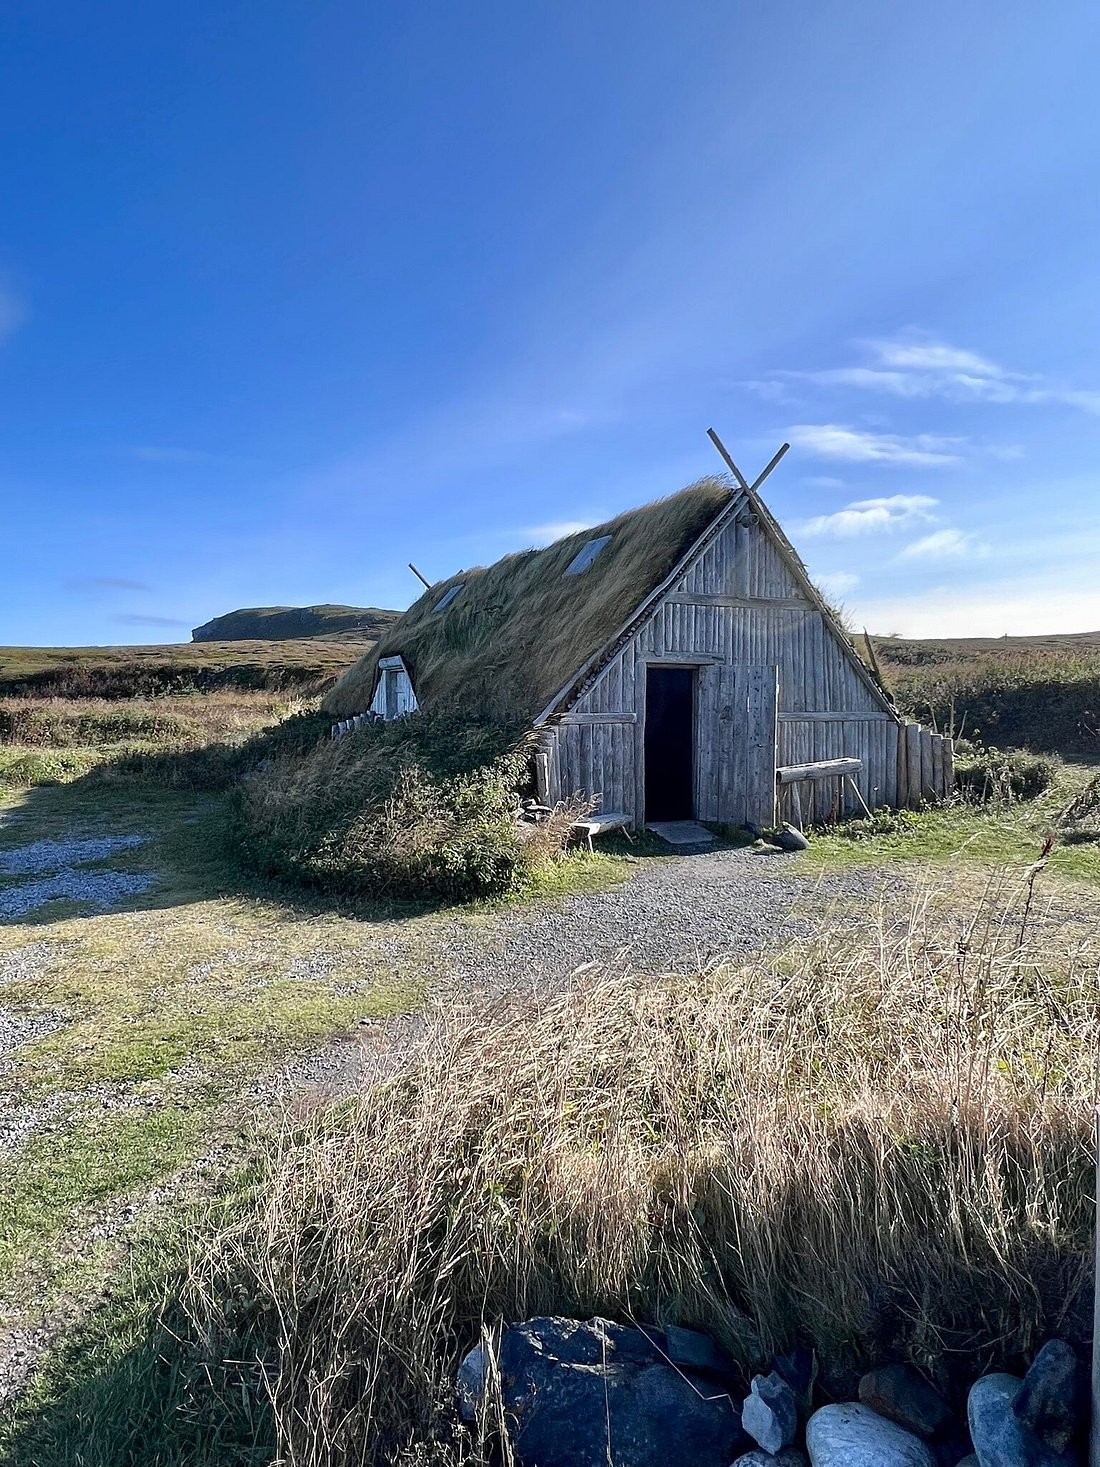 How to Get to L'Anse aux Meadows?